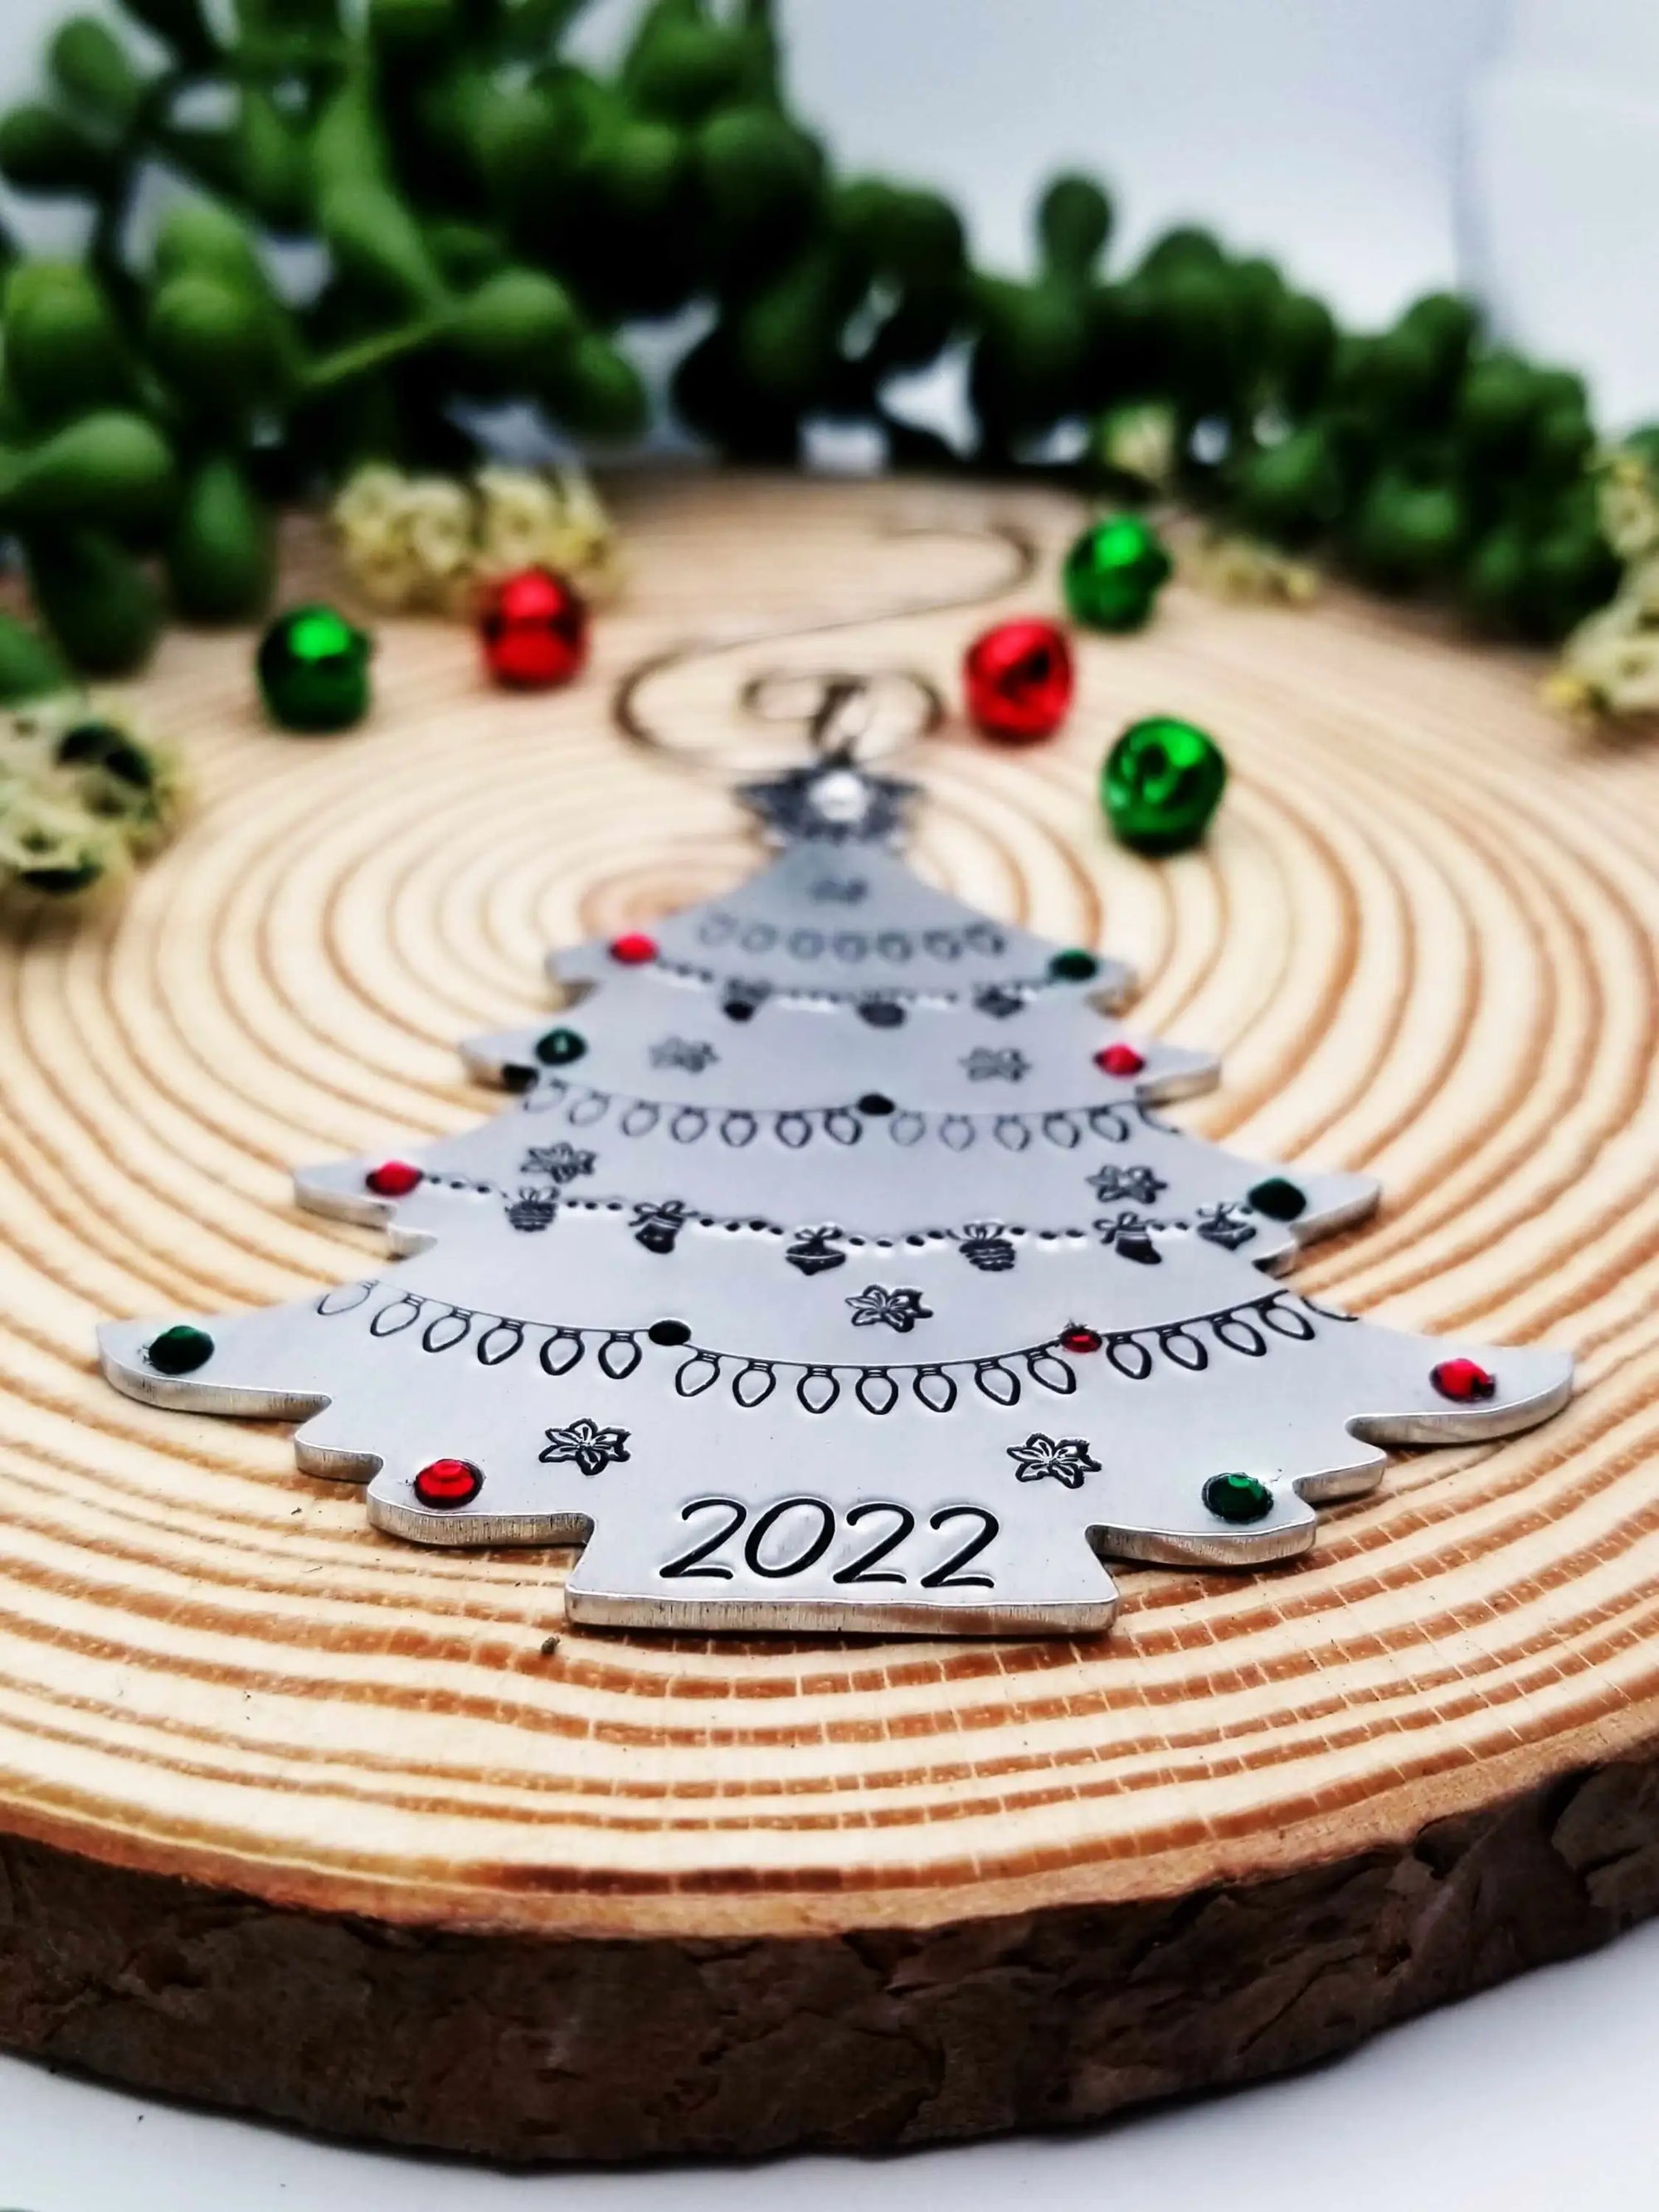 2022 Custom Christmas Ornament, Yearly Ornament, Handmade Ornament, Personalized Christmas Ornament, Funny Ornament Gift